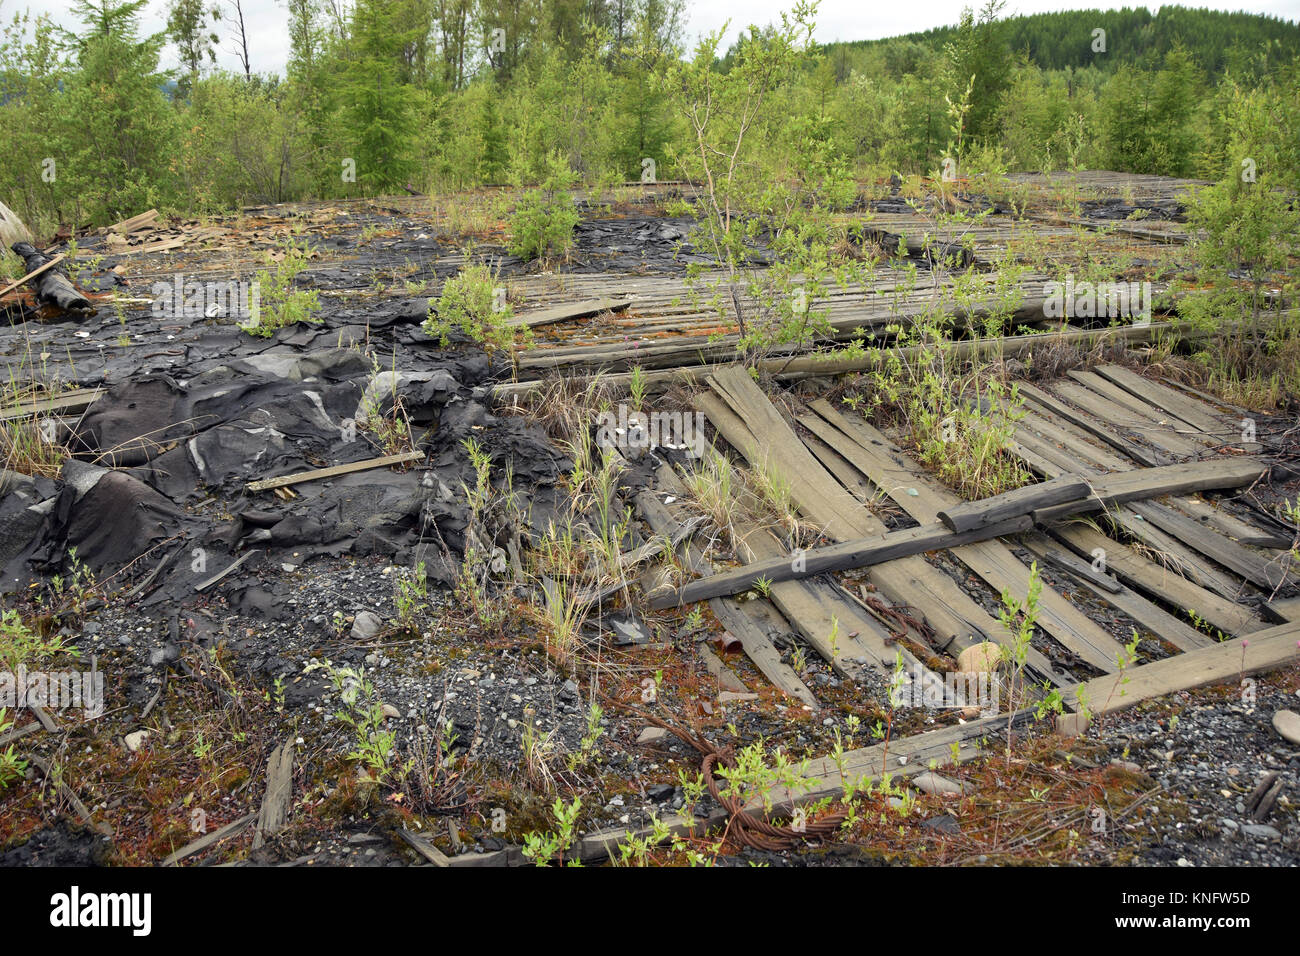 The former Kadyktchan gulag camp , in the northern part of Kolyma, Siberia. Here is what  remains of a barrack surrounded by taiga. Stock Photo